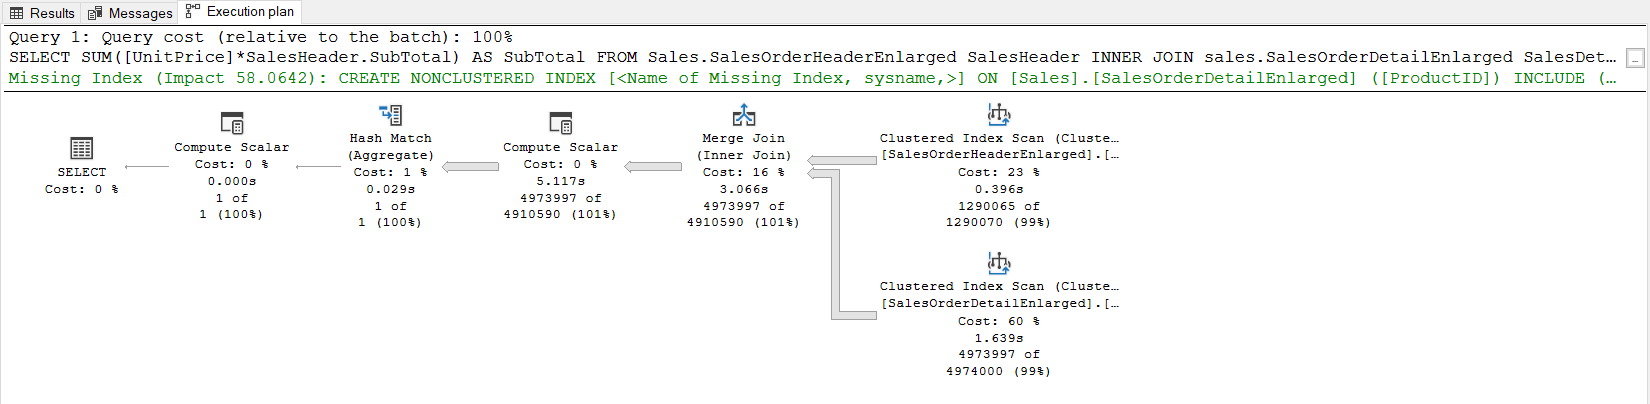 Execution plan of a query which includes merge join